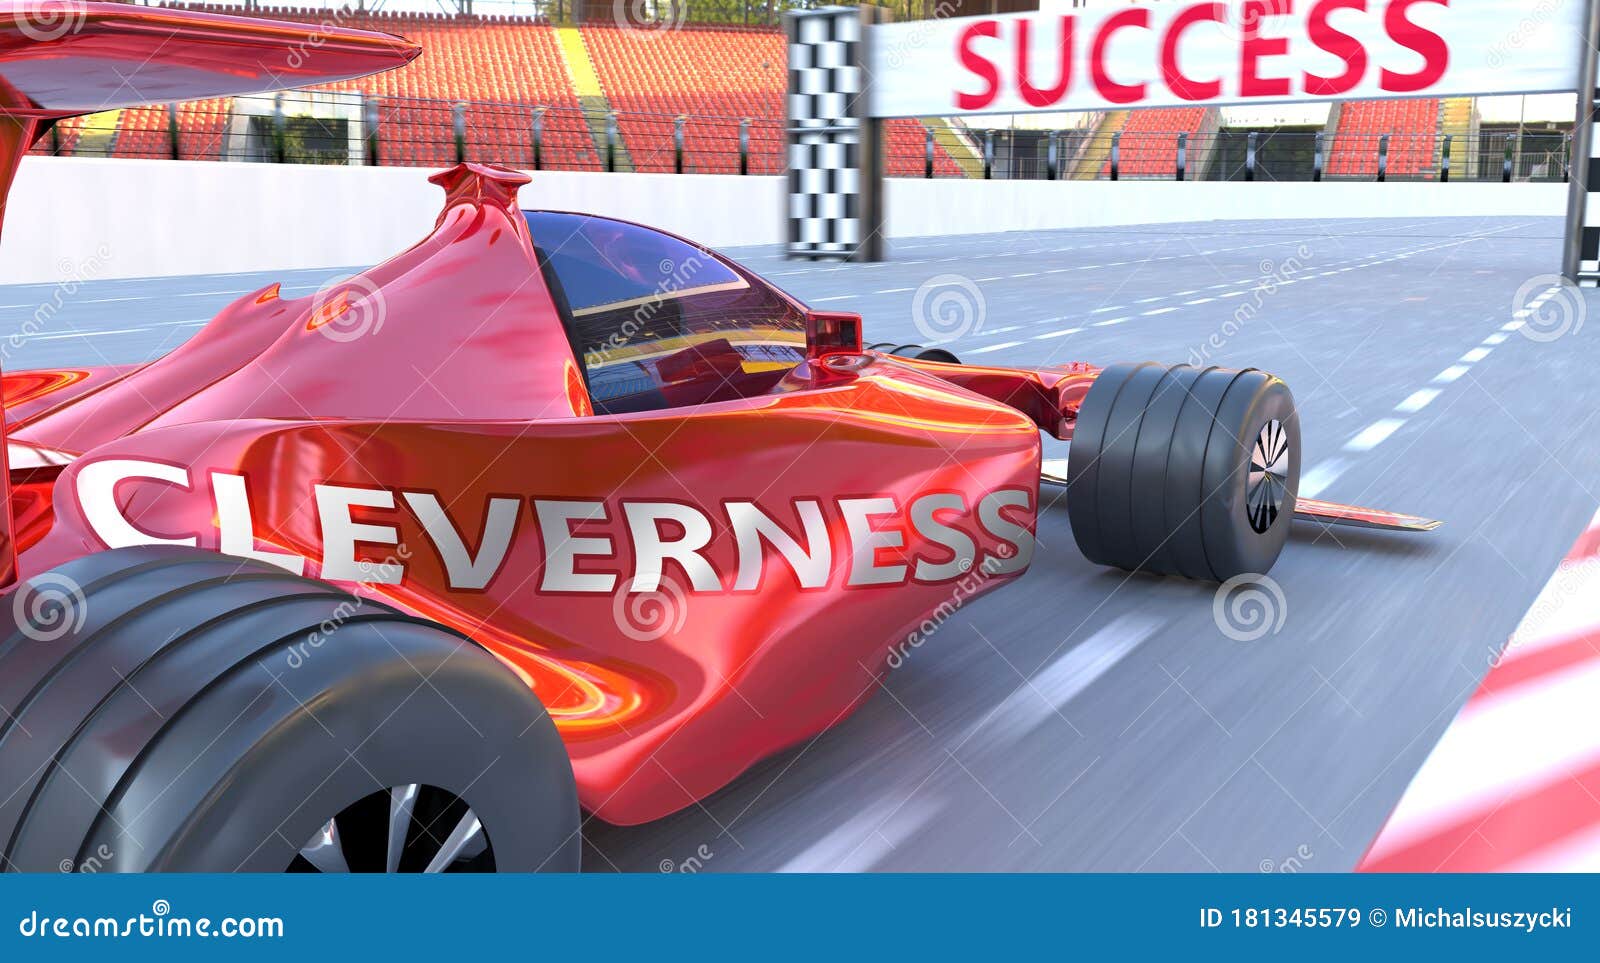 cleverness and success - pictured as word cleverness and a f1 car, to ize that cleverness can help achieving success and